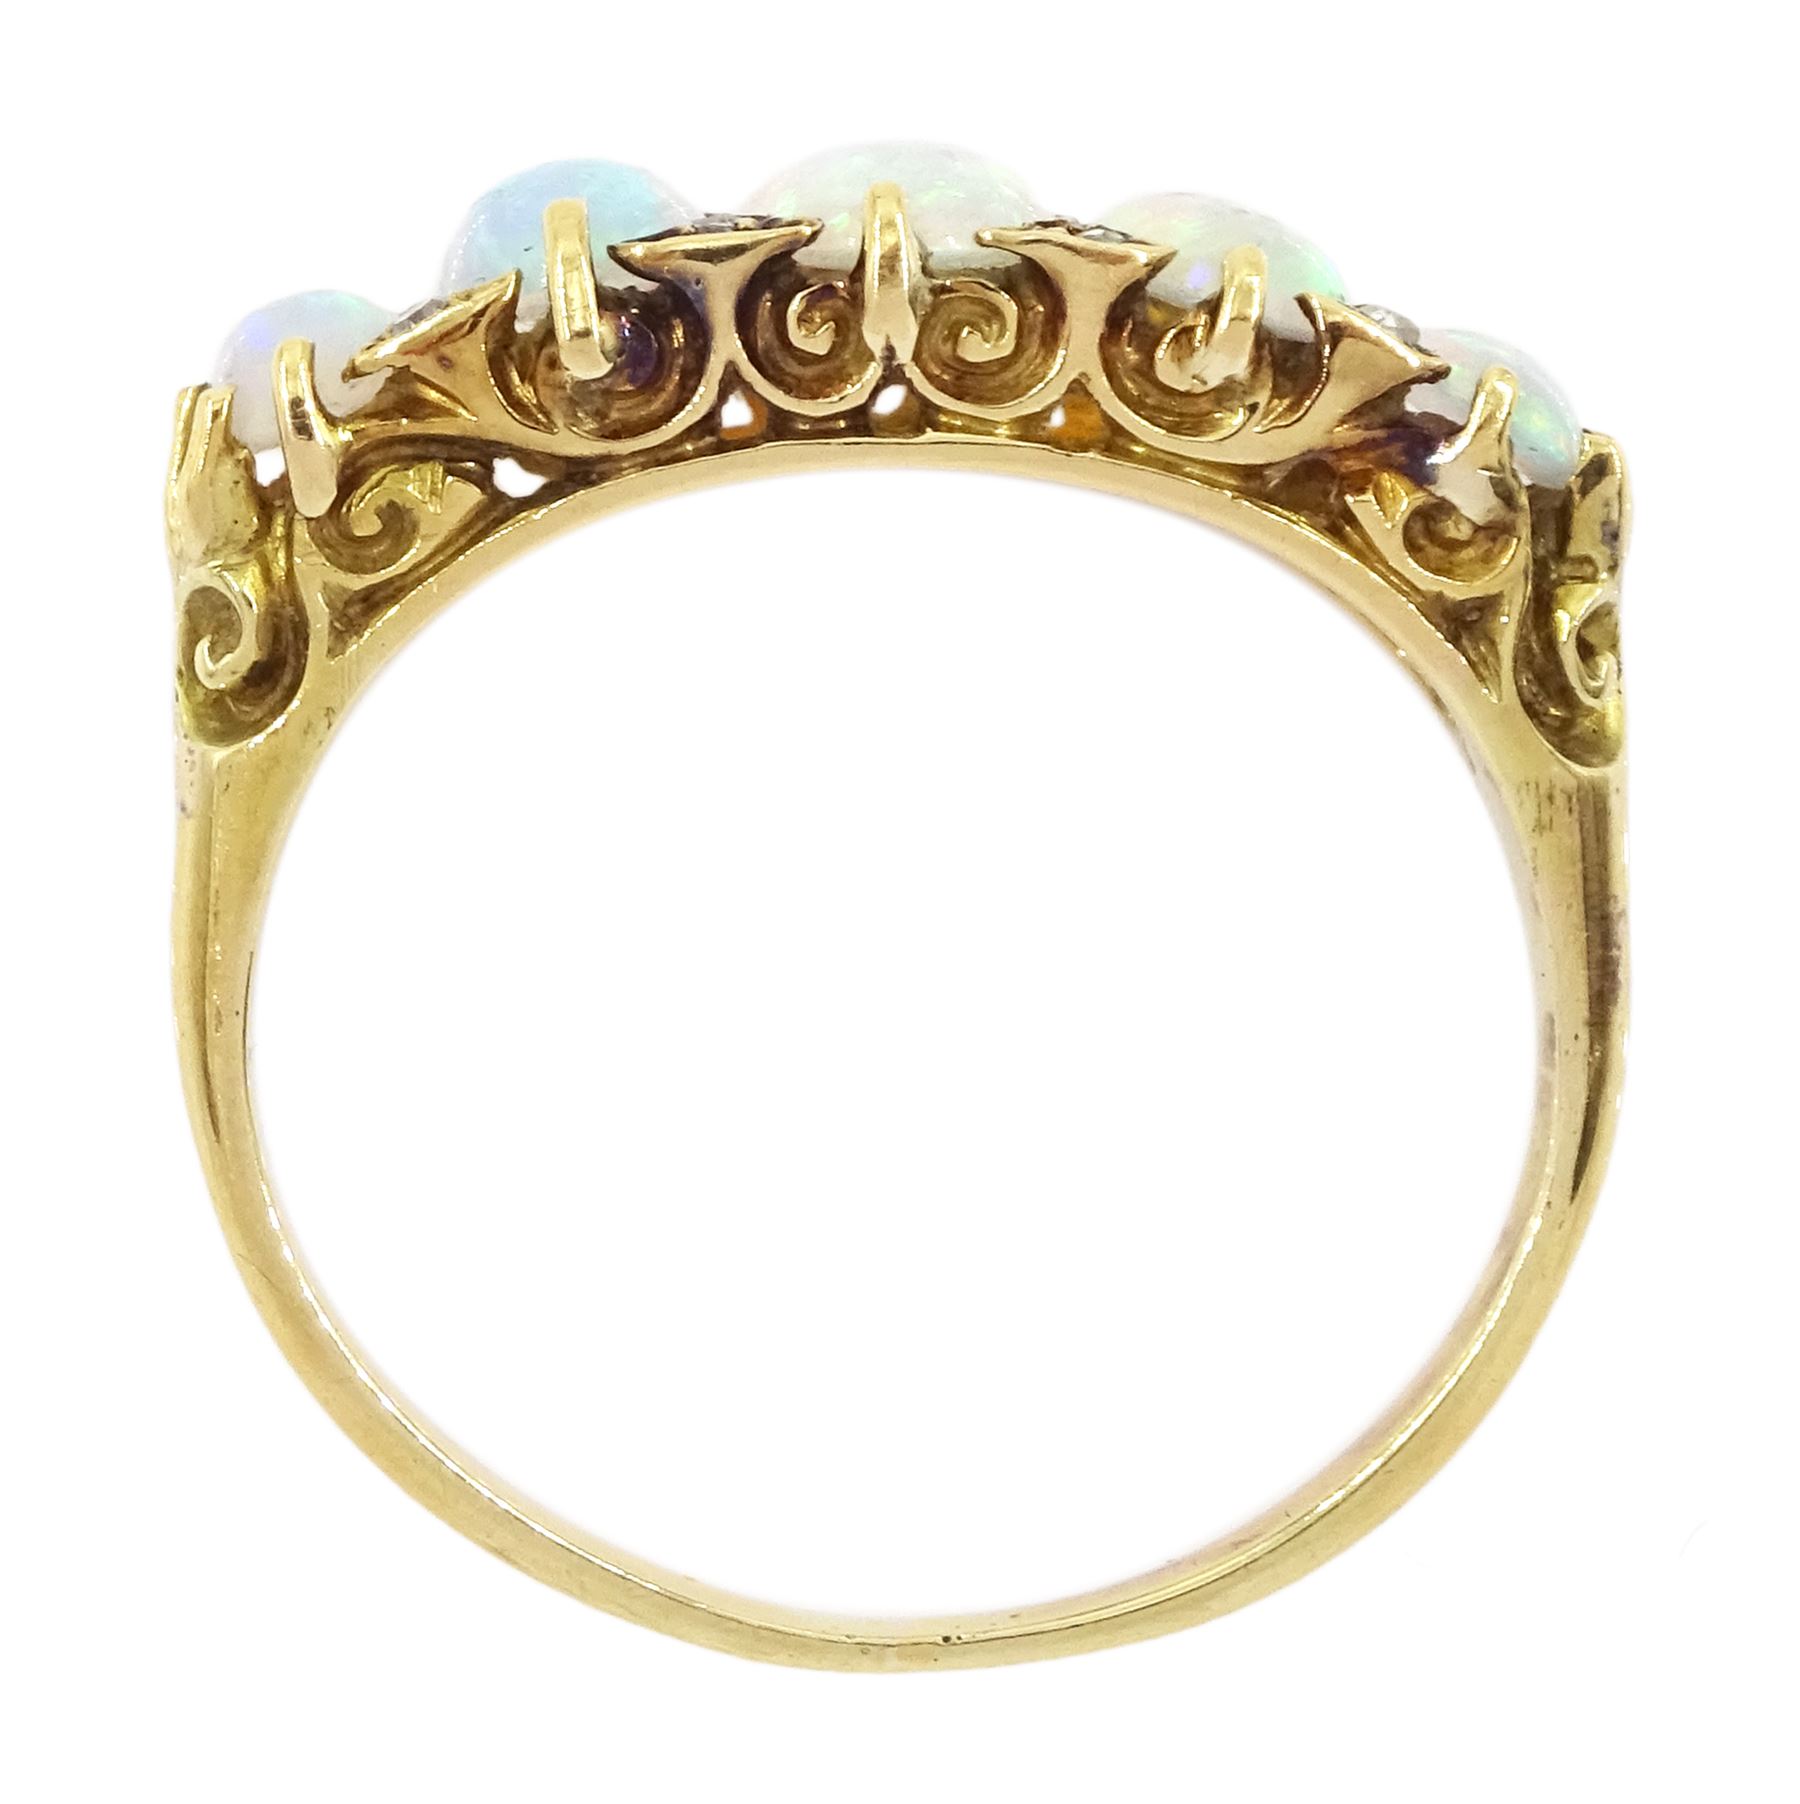 Early 20th century 15ct gold five stone graduating opal ring - Image 4 of 4